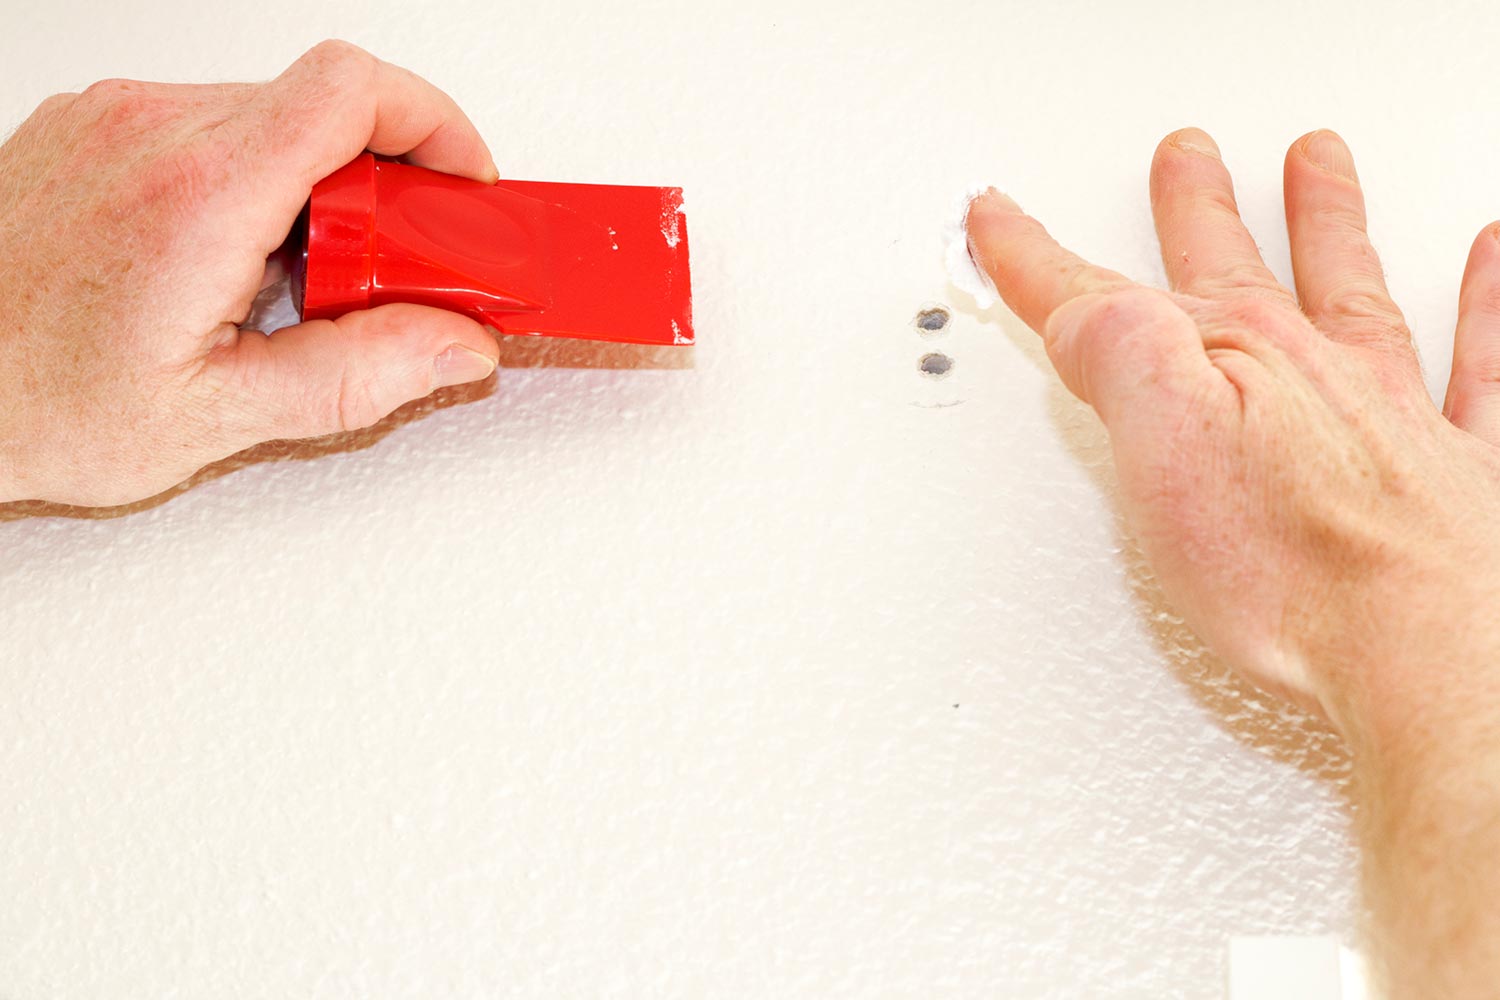 Hand about to apply white spackling paste to two holes in the wall while holding on other hand a red tool to smooth spackling